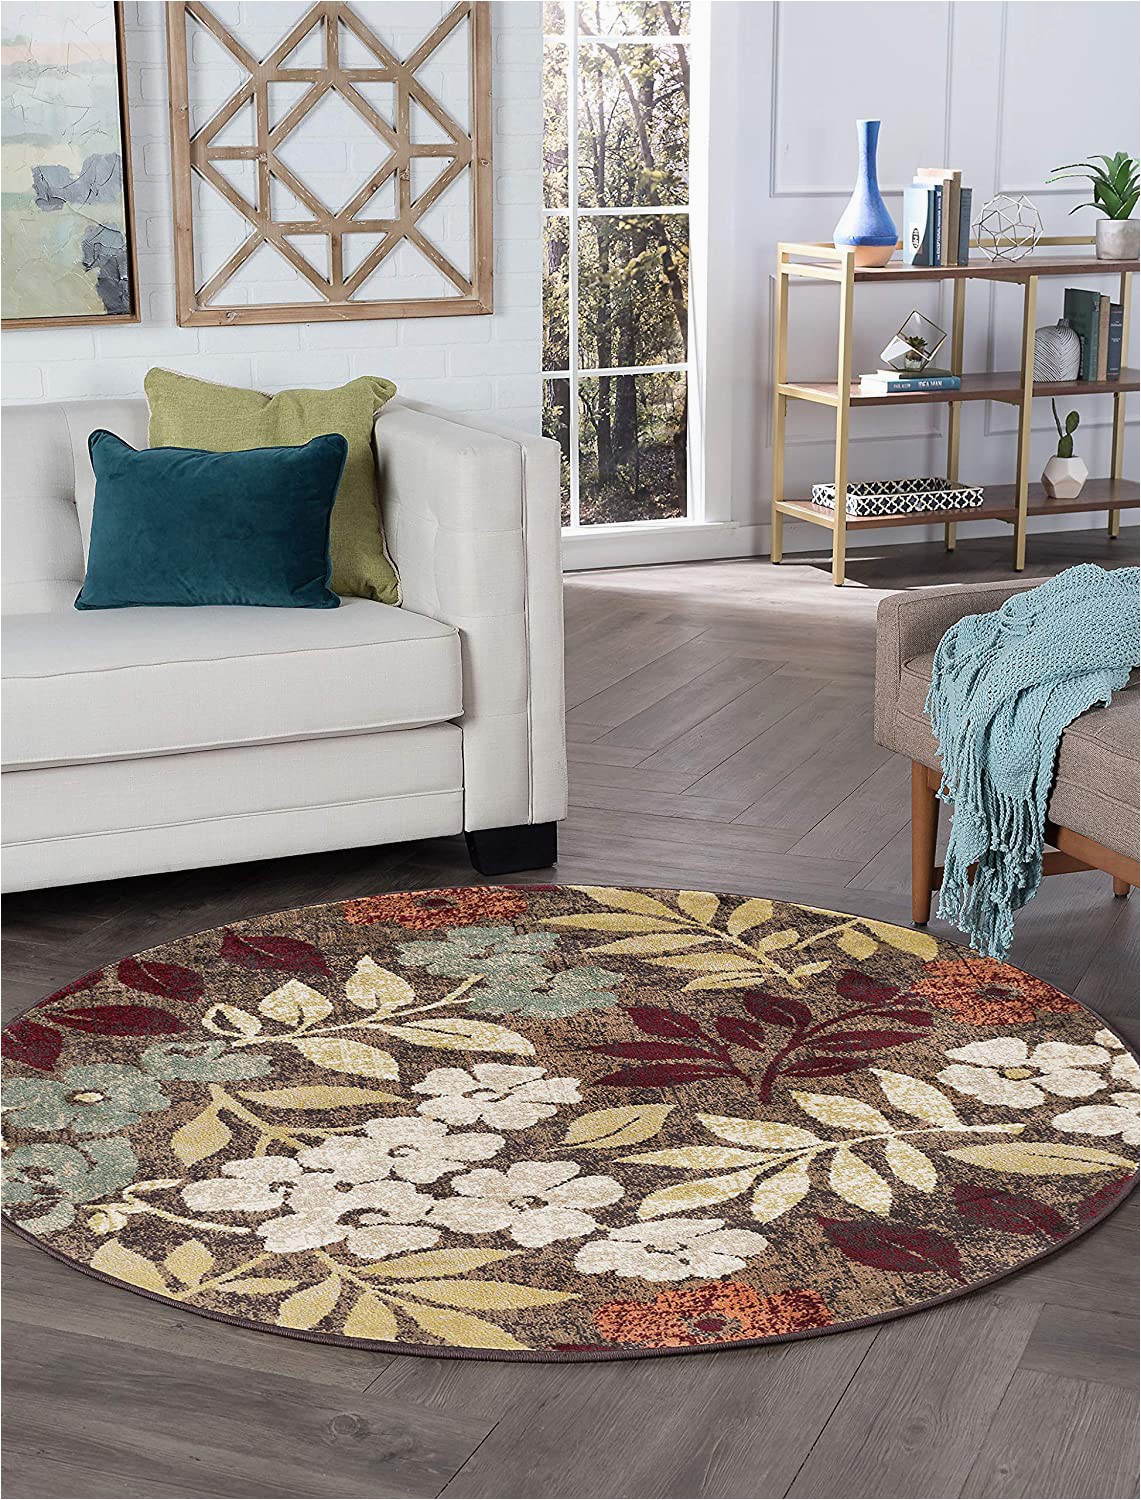 7 Feet Round area Rugs Tayse Kalea Brown 8 Foot Round area Rug for Living Bedroom or Dining Room Transitional Floral